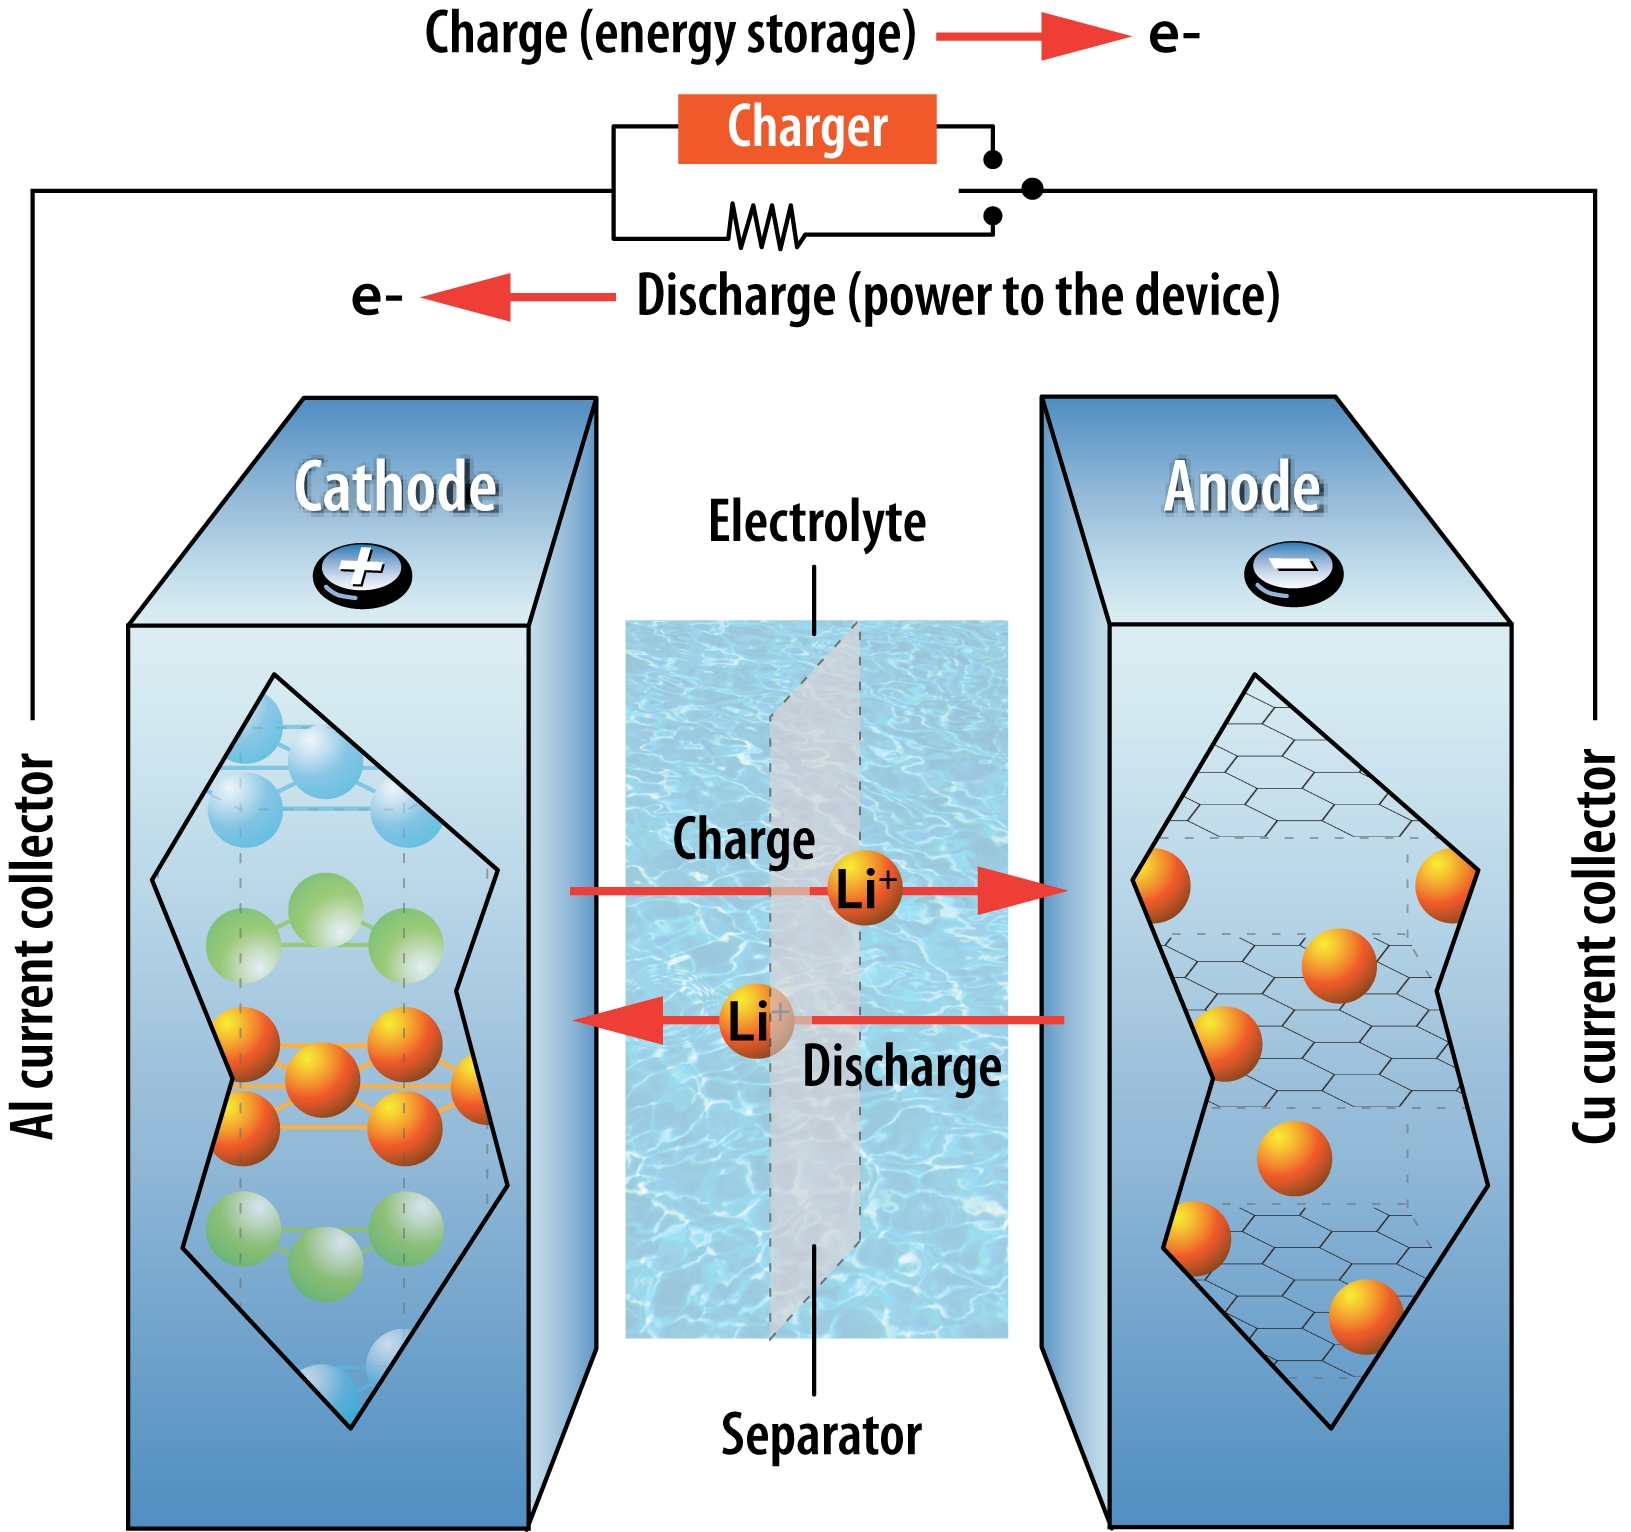 Five emerging battery technologies for electric vehicles | Brookings